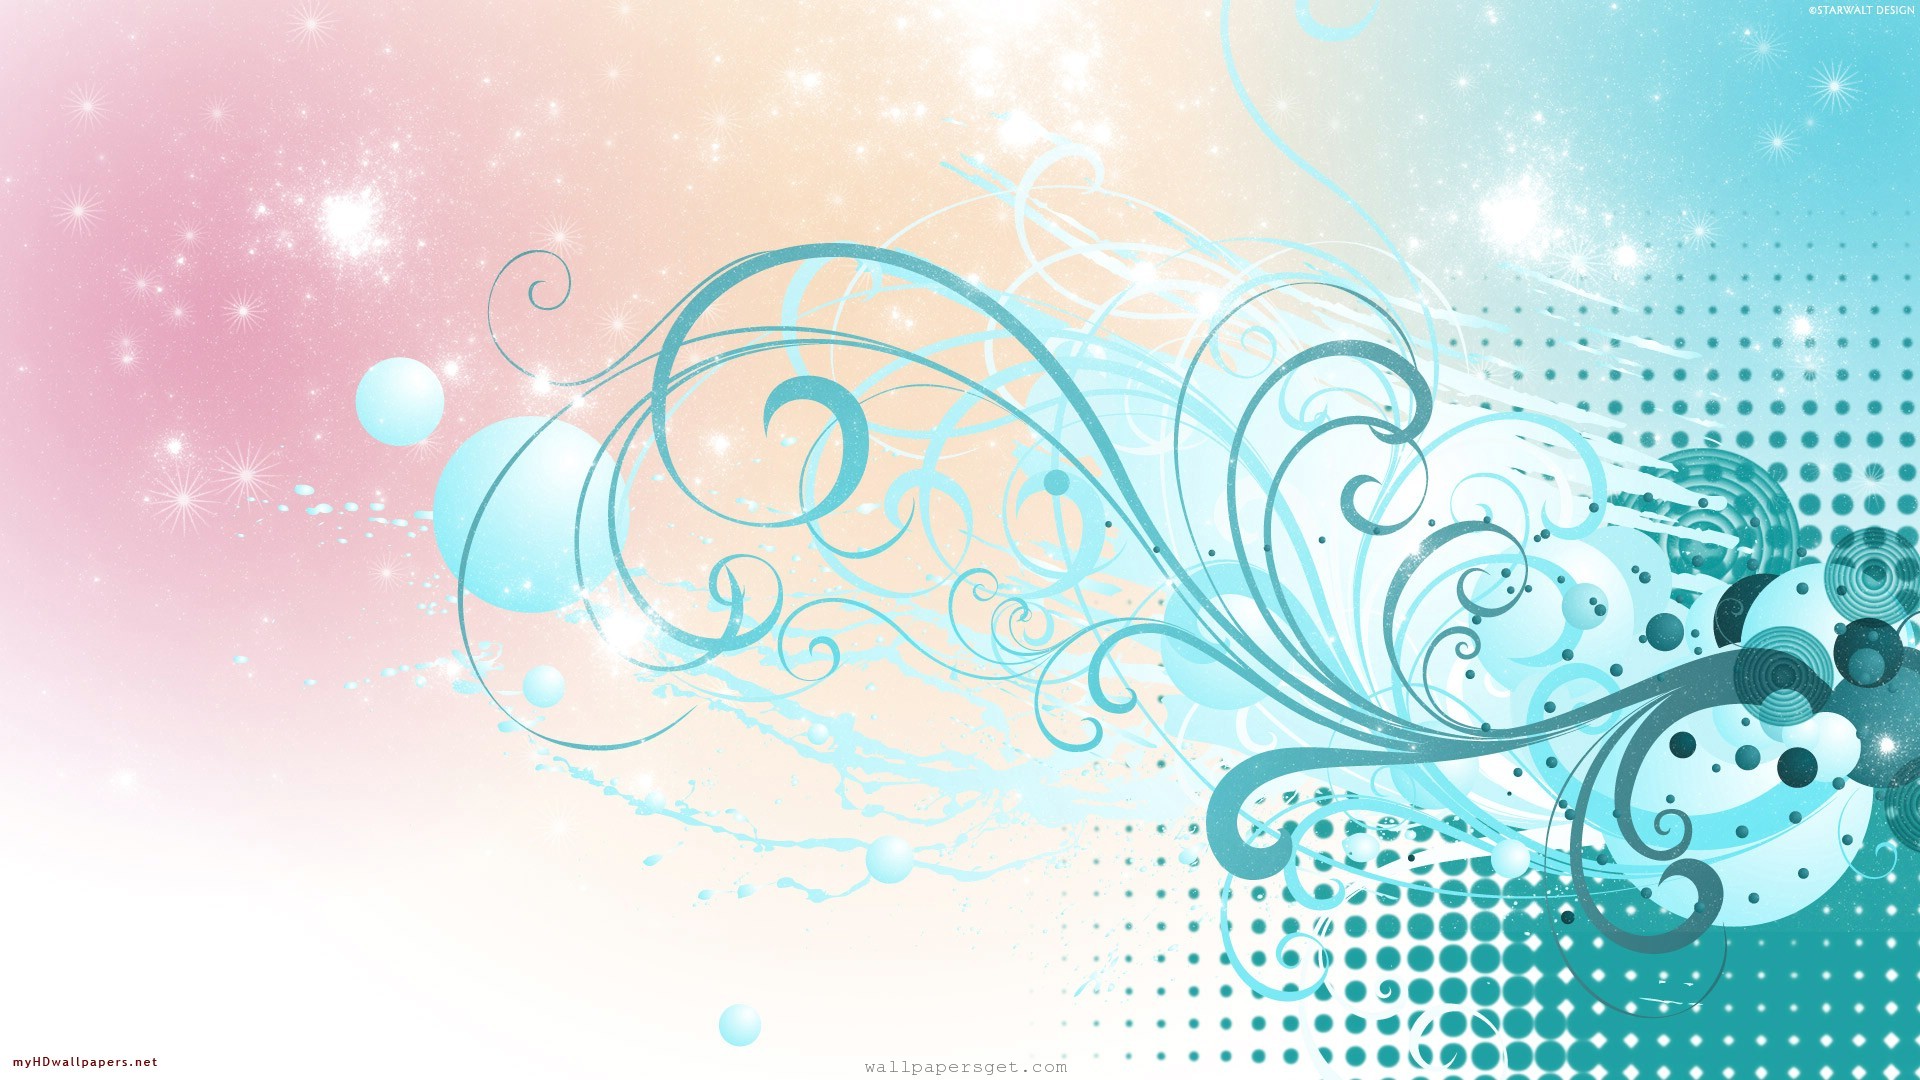 Beautiful designed backgrounds for your background